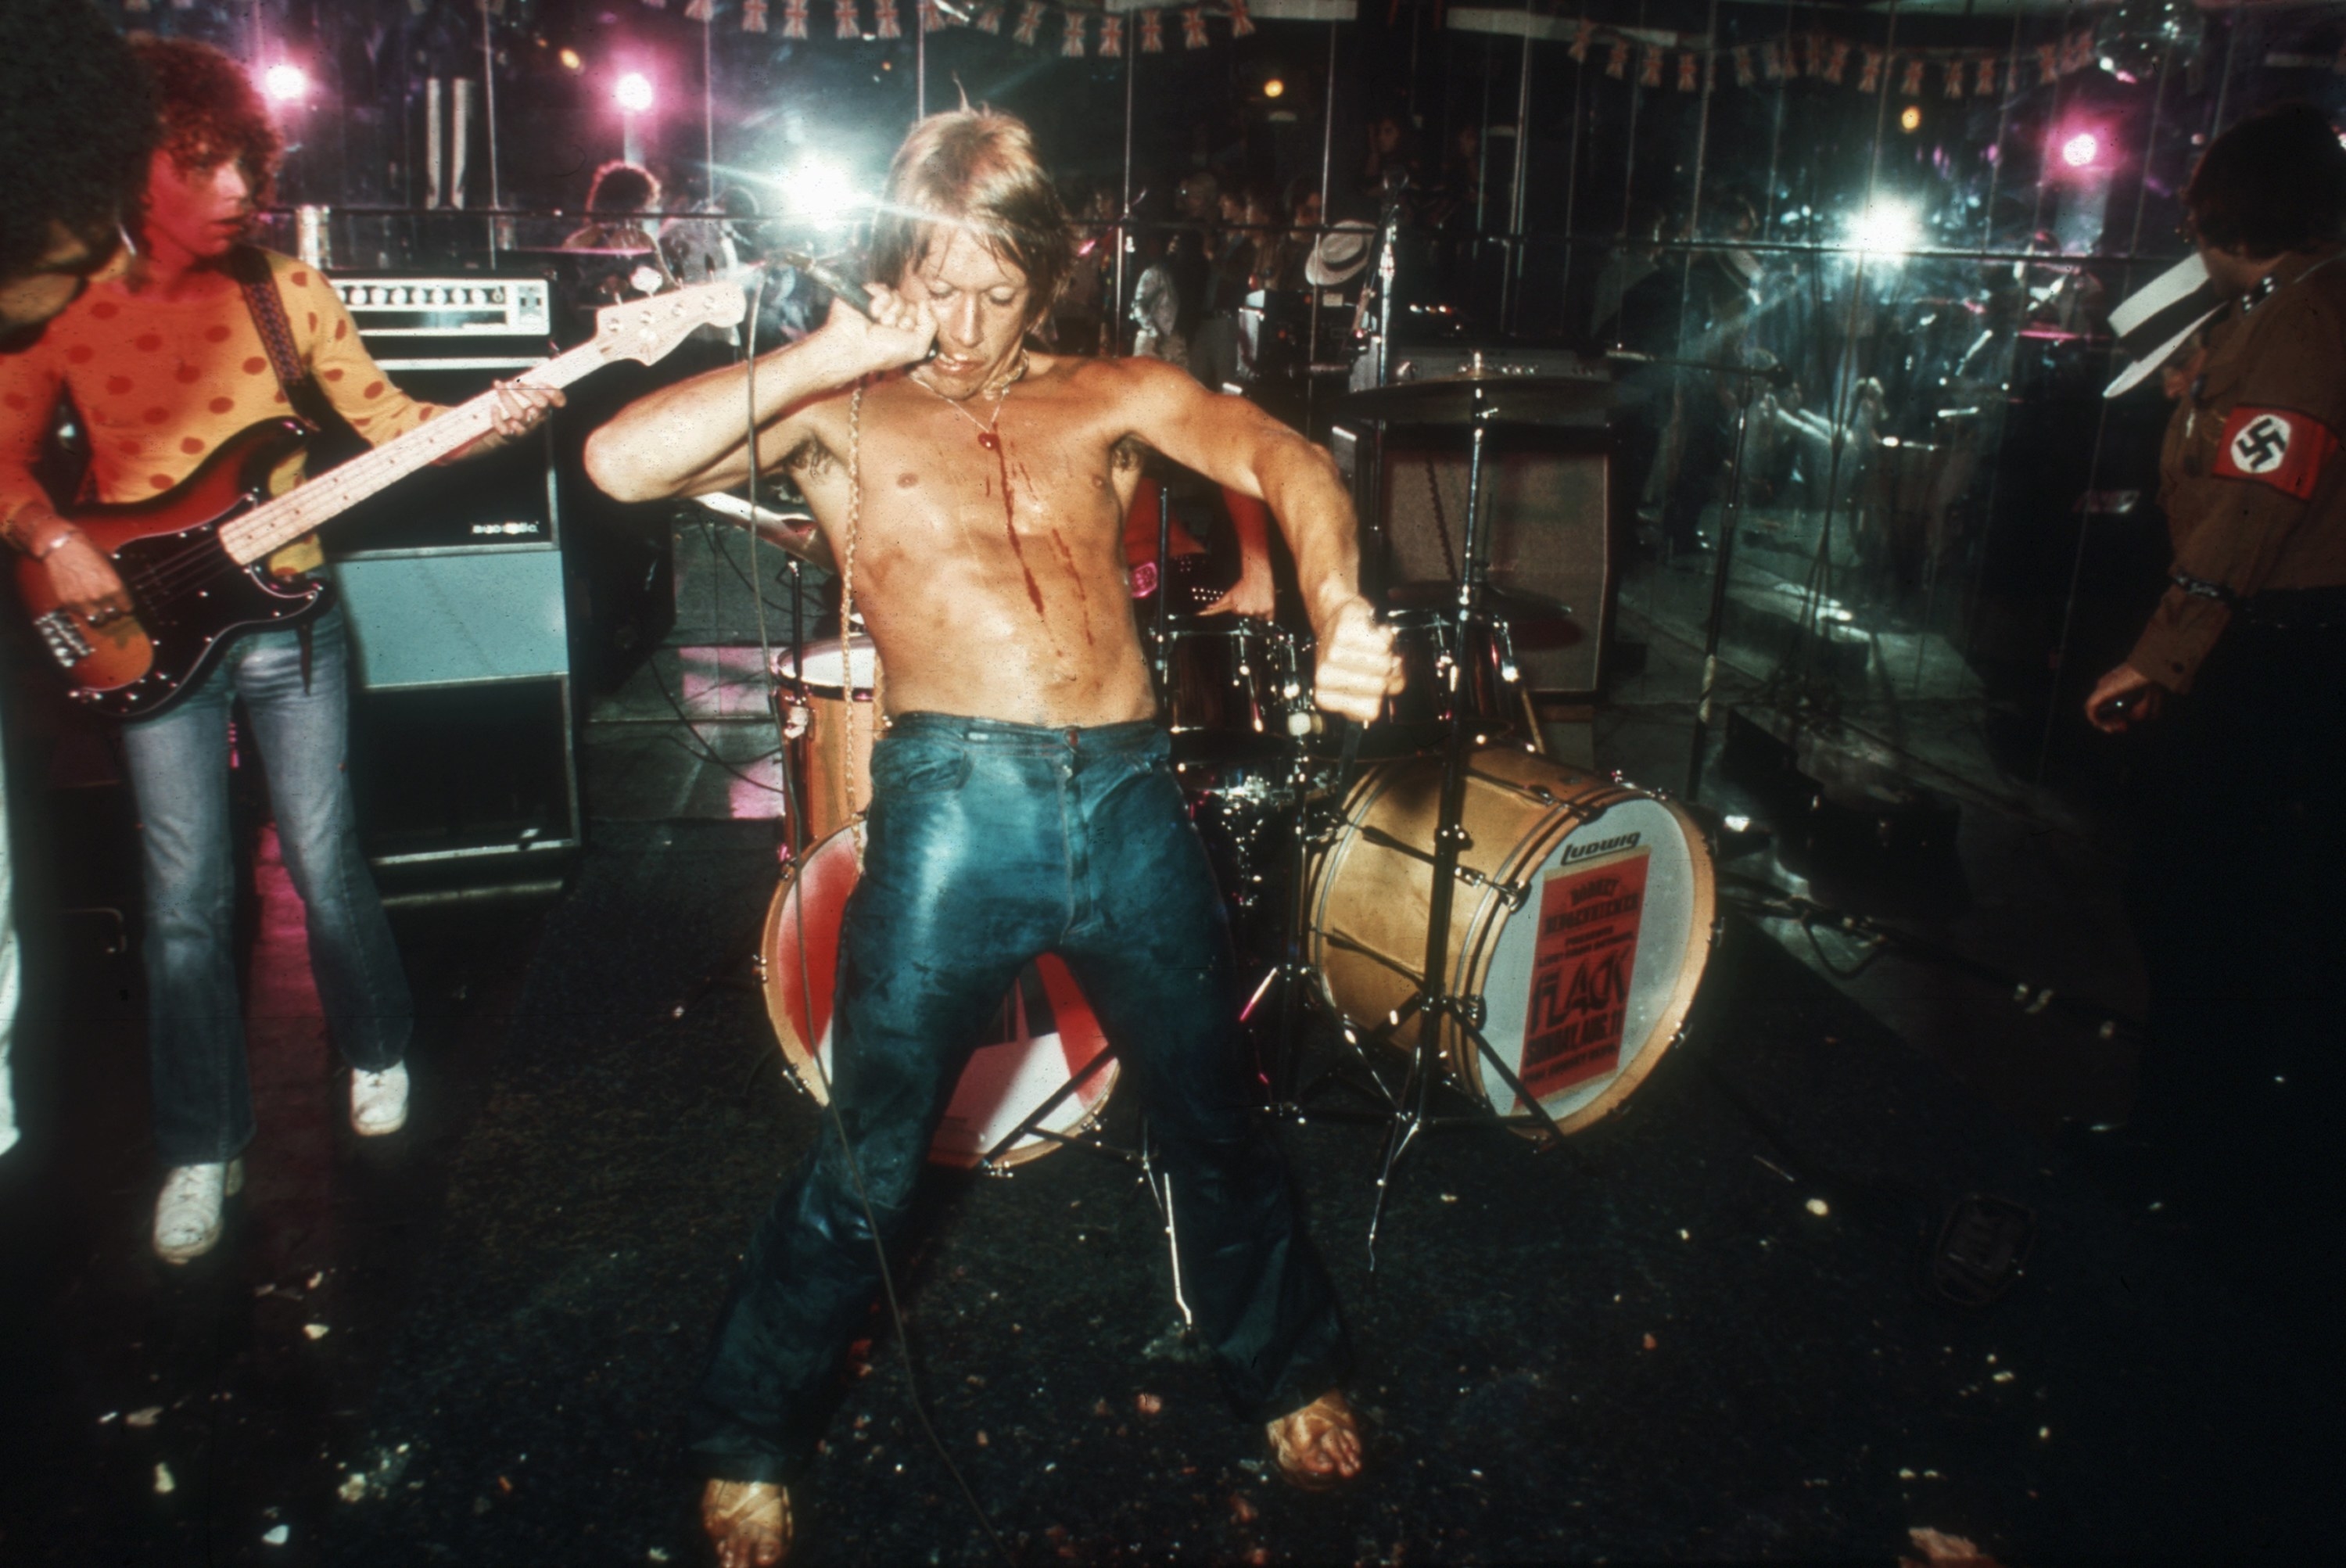 Iggy Pop in the middle of performing as his chest bleeds after cutting himself